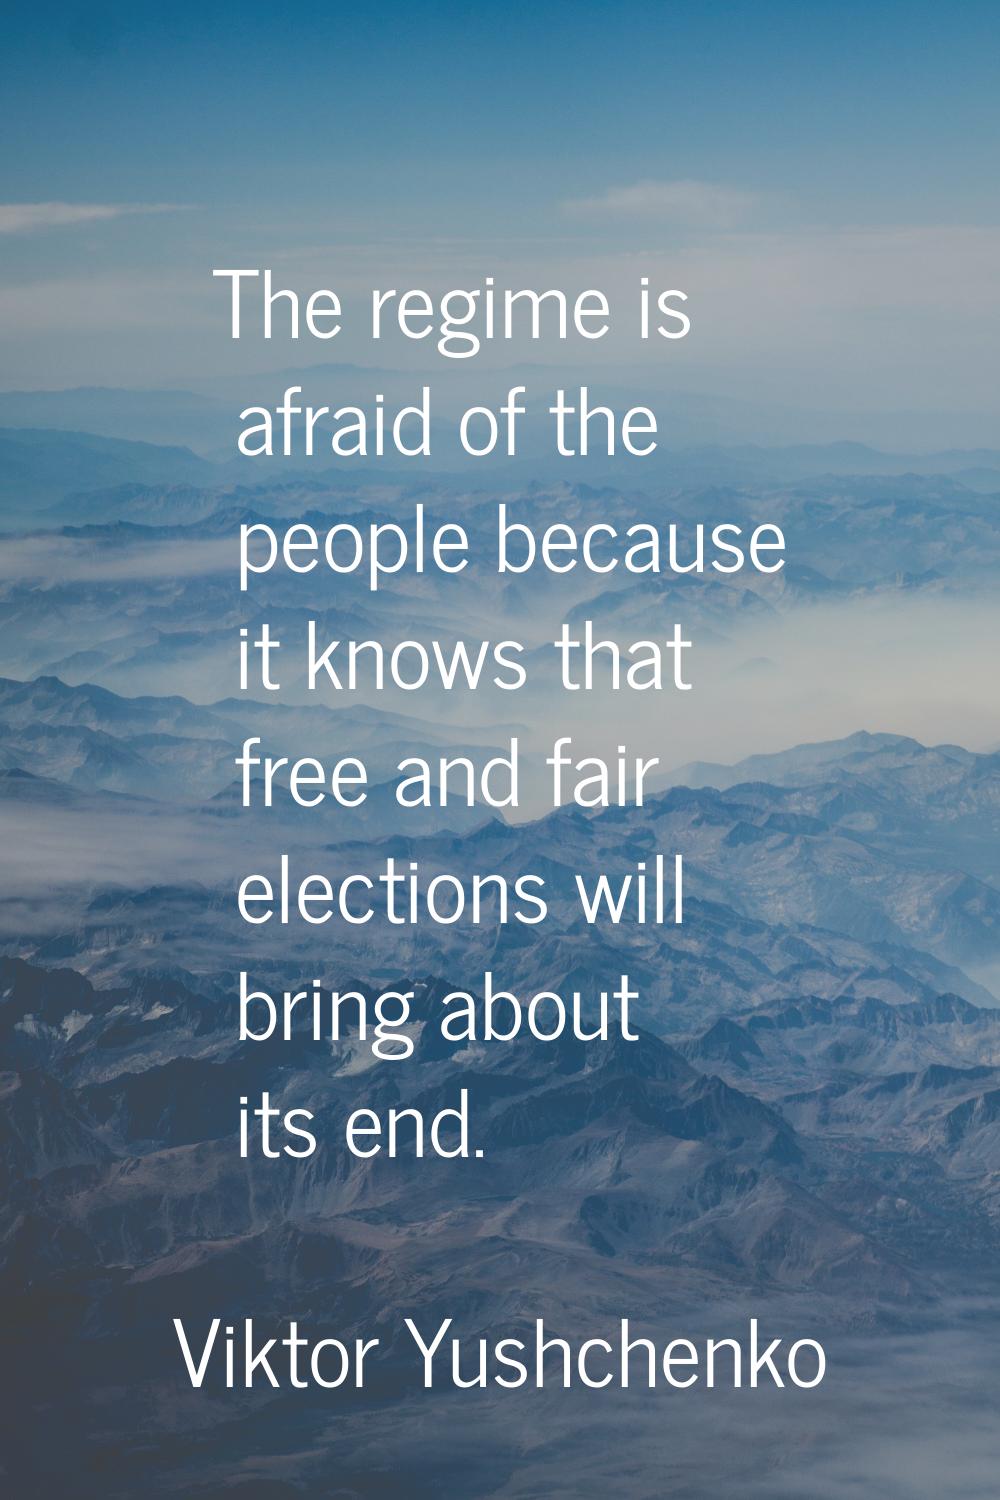 The regime is afraid of the people because it knows that free and fair elections will bring about i